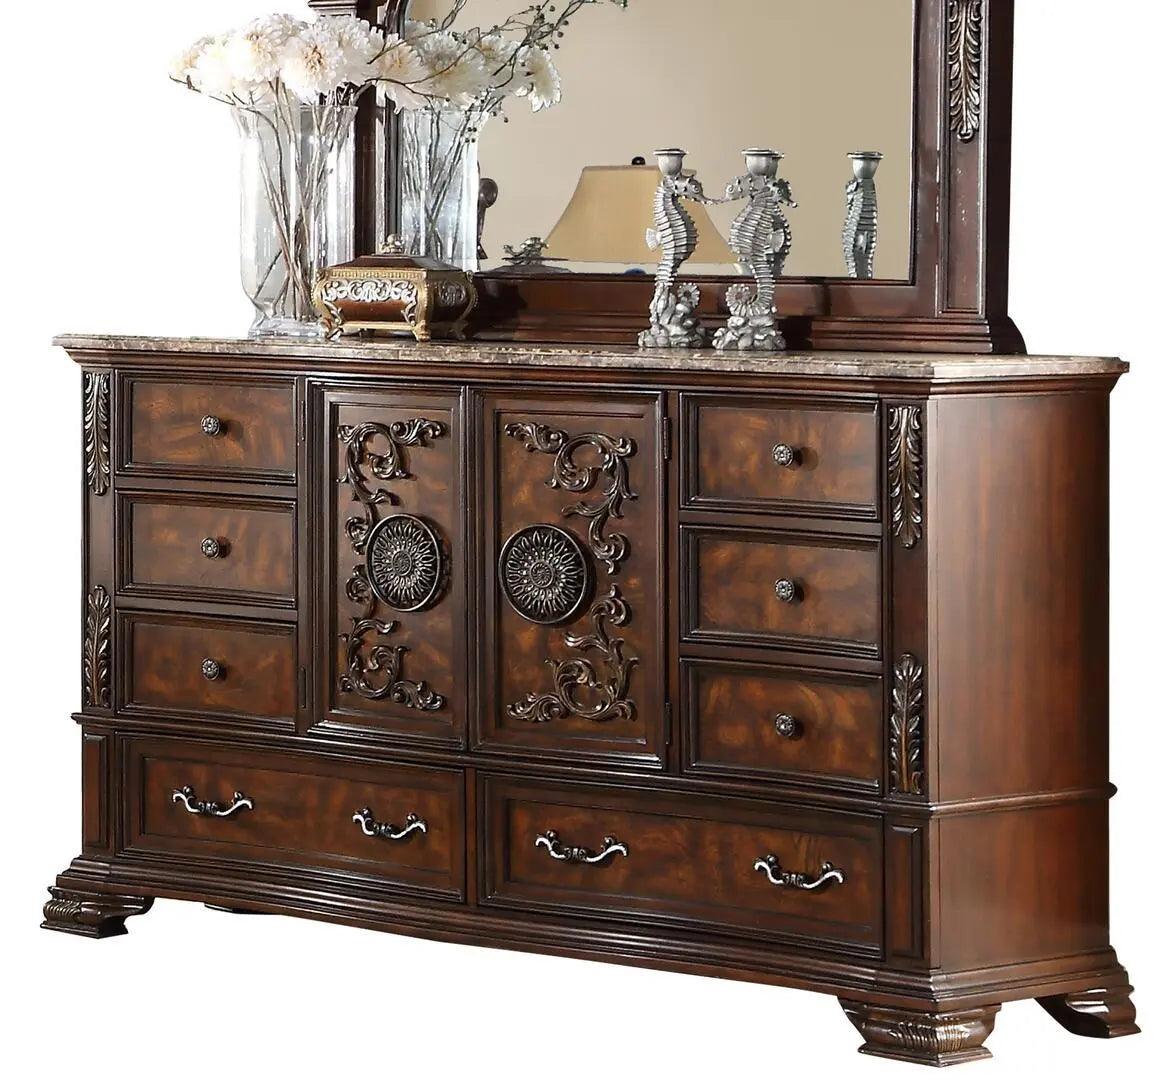 Santa Monica 6Pc Traditional Bedroom Set in Cherry Finish by Cosmos Furniture Cosmos Furniture